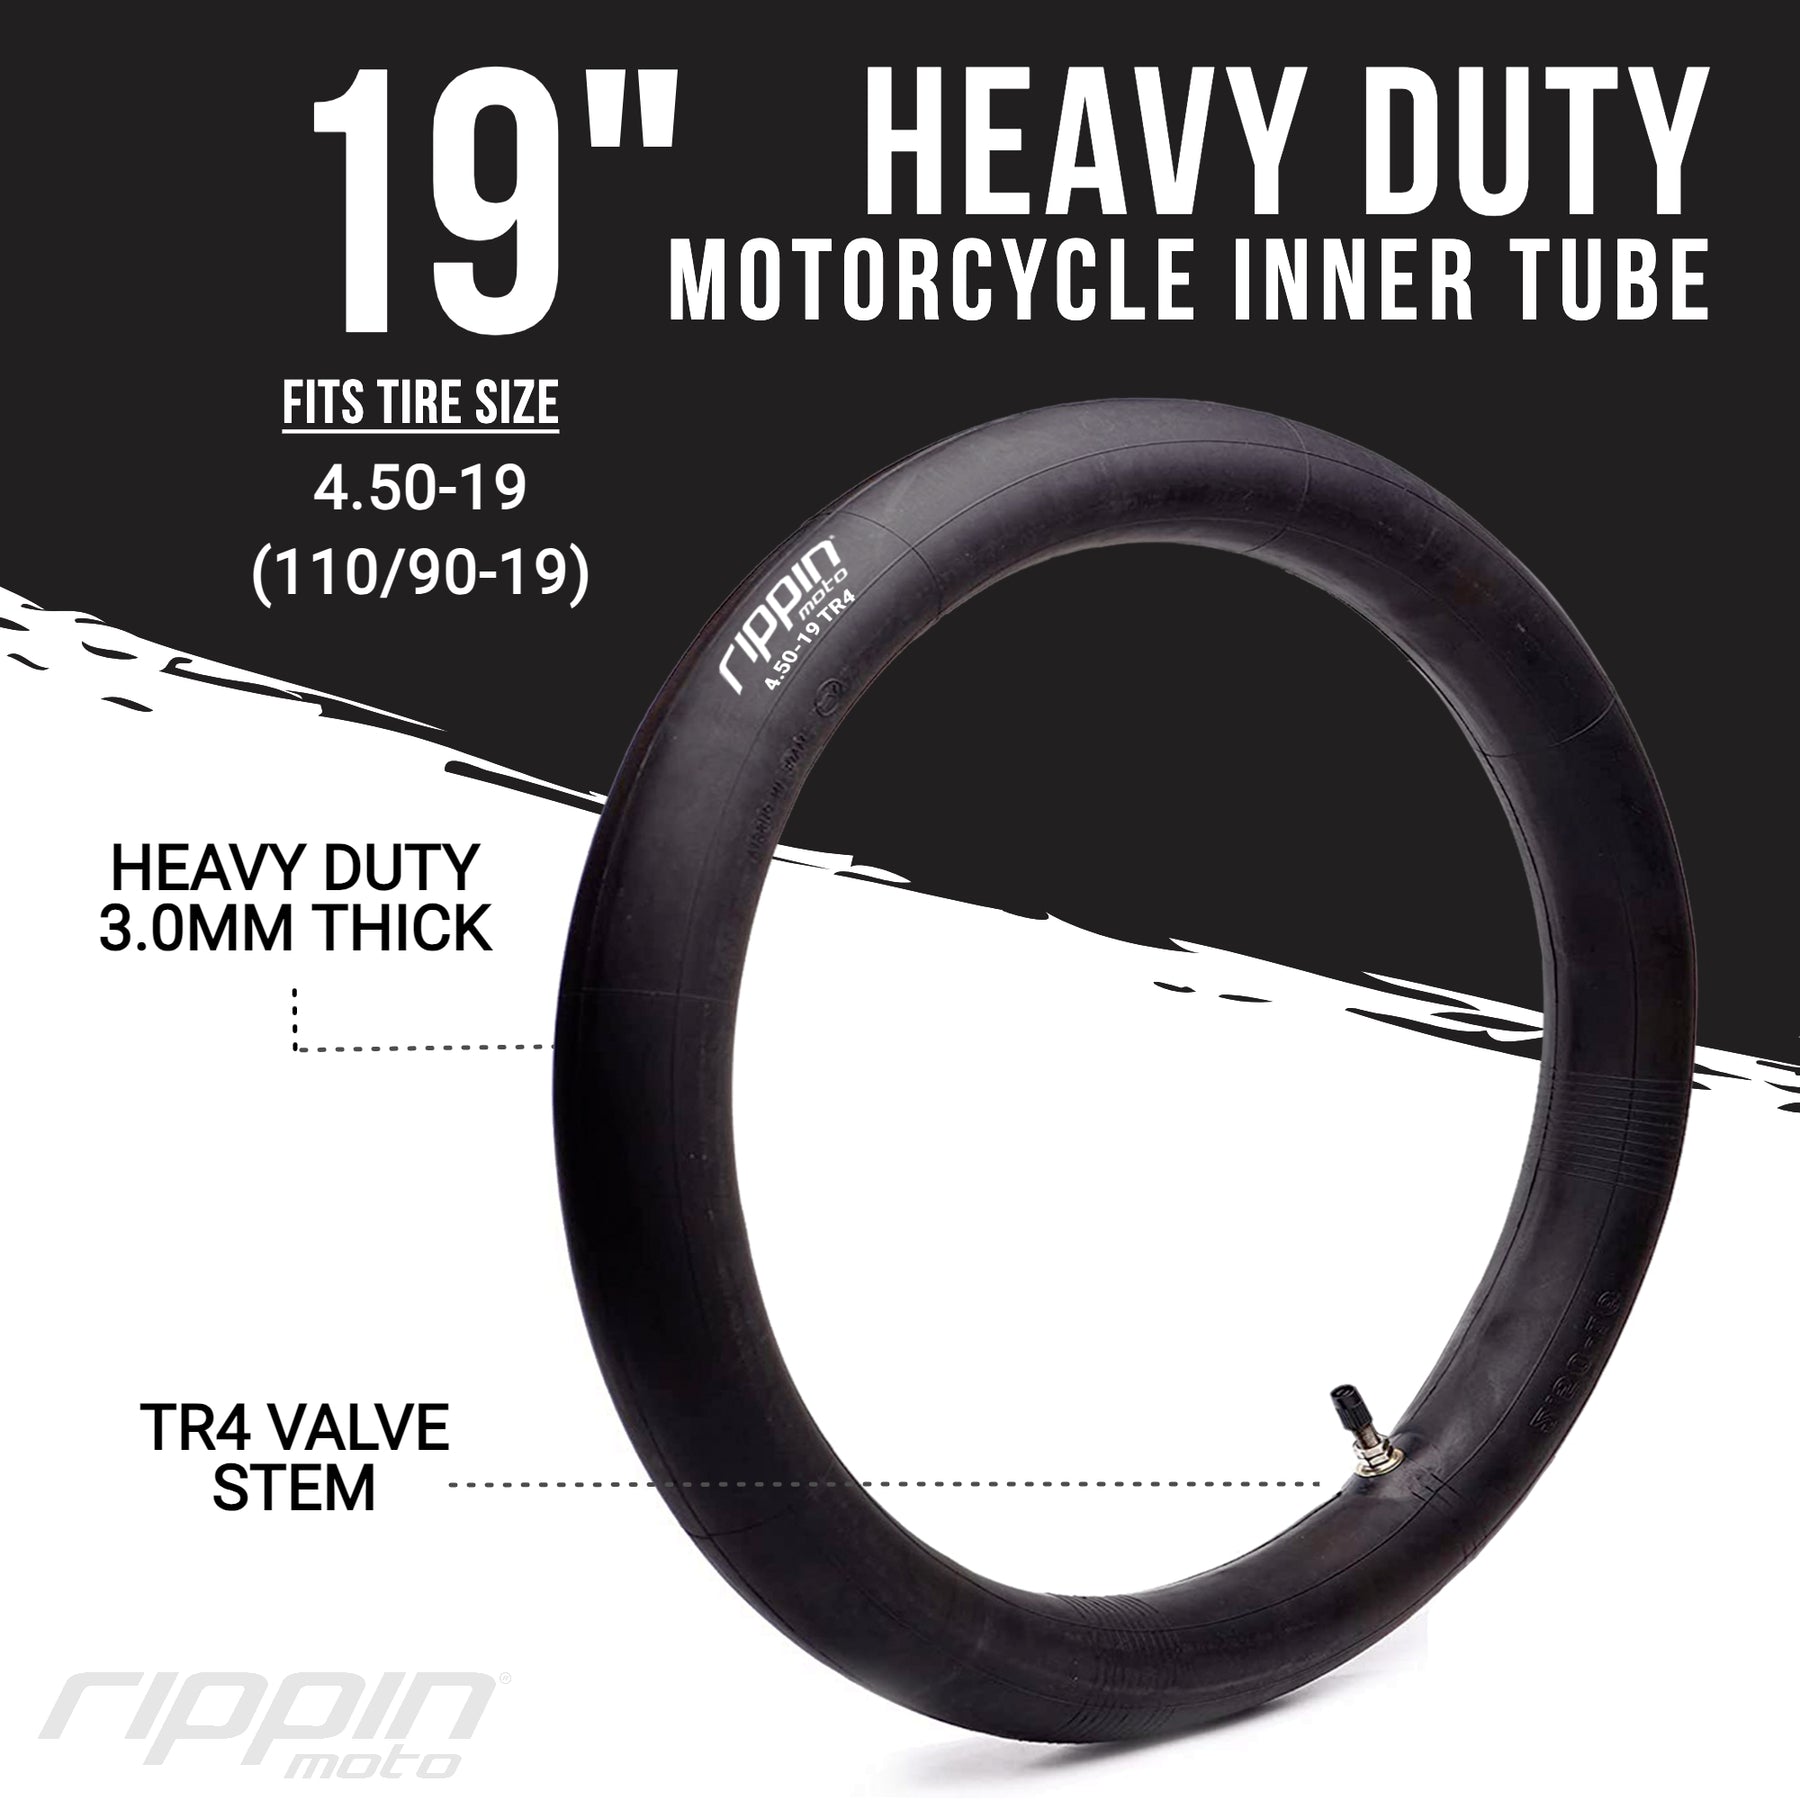 (2-Pack) 110/90-19 (4.50 x 19) - 120/90-19 Motorcycle Inner Tubes - 19  Dirt Bike Natural Rubber Tubes - Pinch and Puncture-Resistant Tubes - TR4